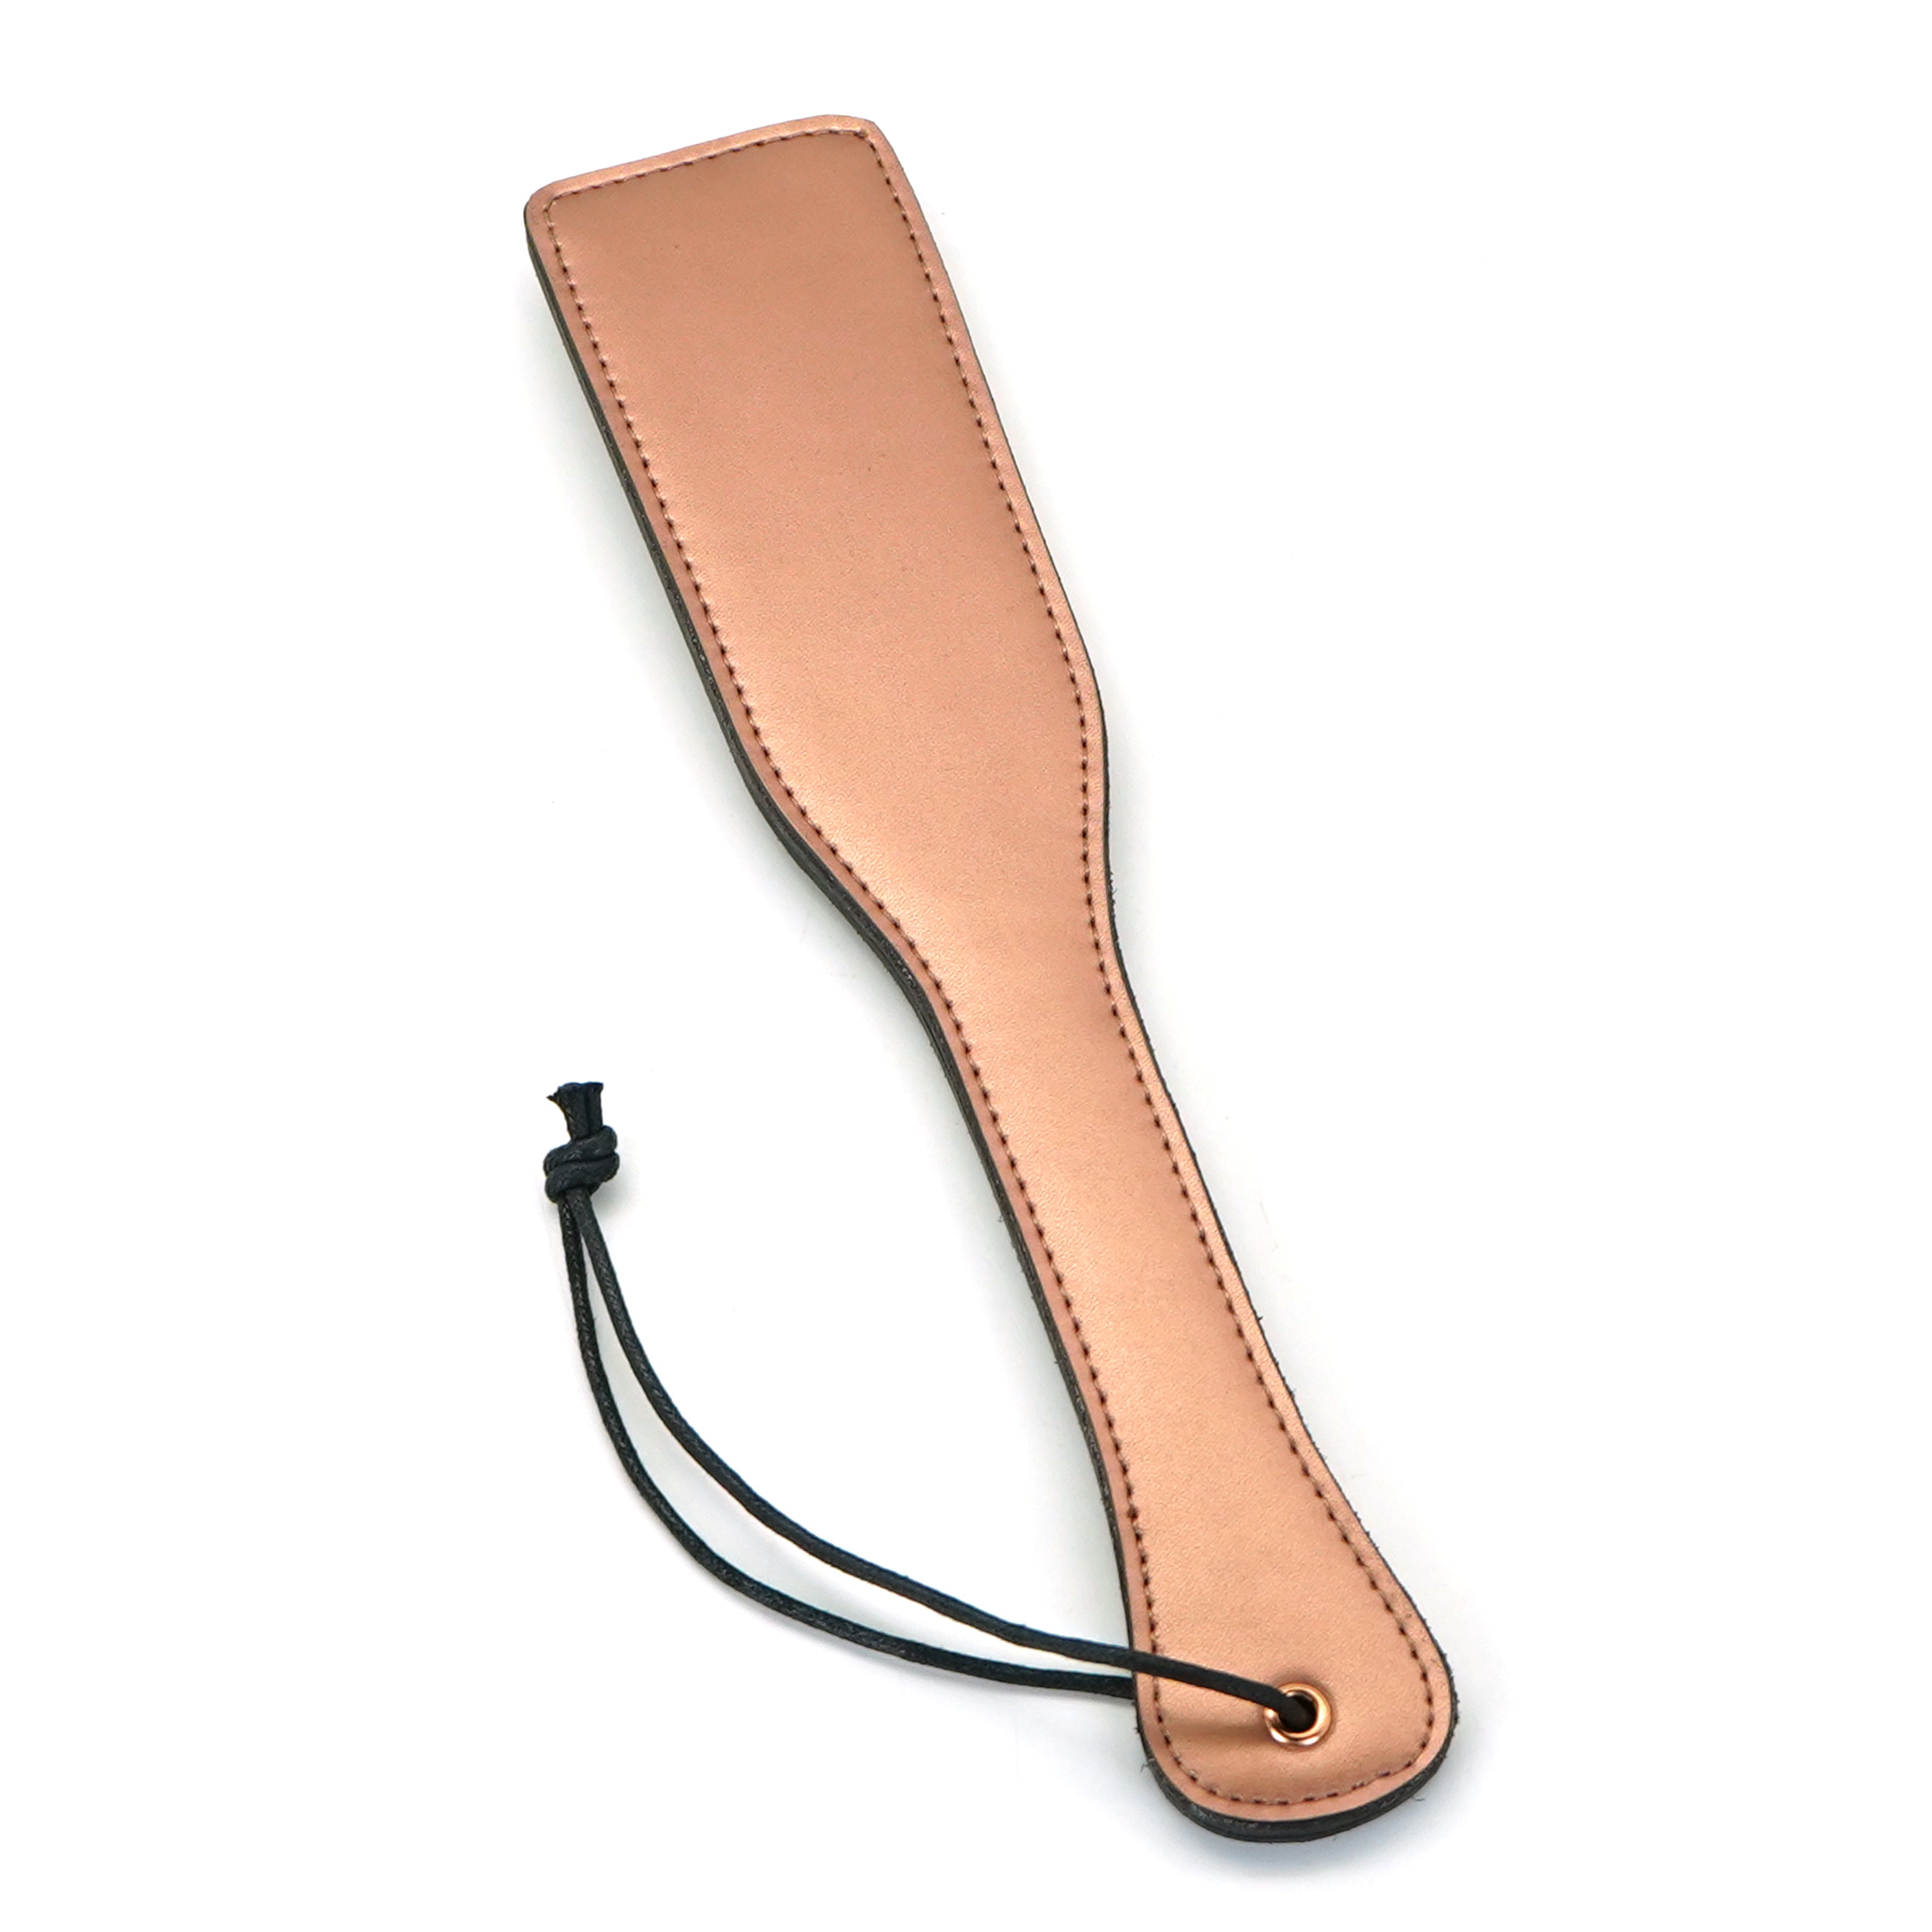 Paddle - Memory: The Rose Gold Luxury BDSM Collection